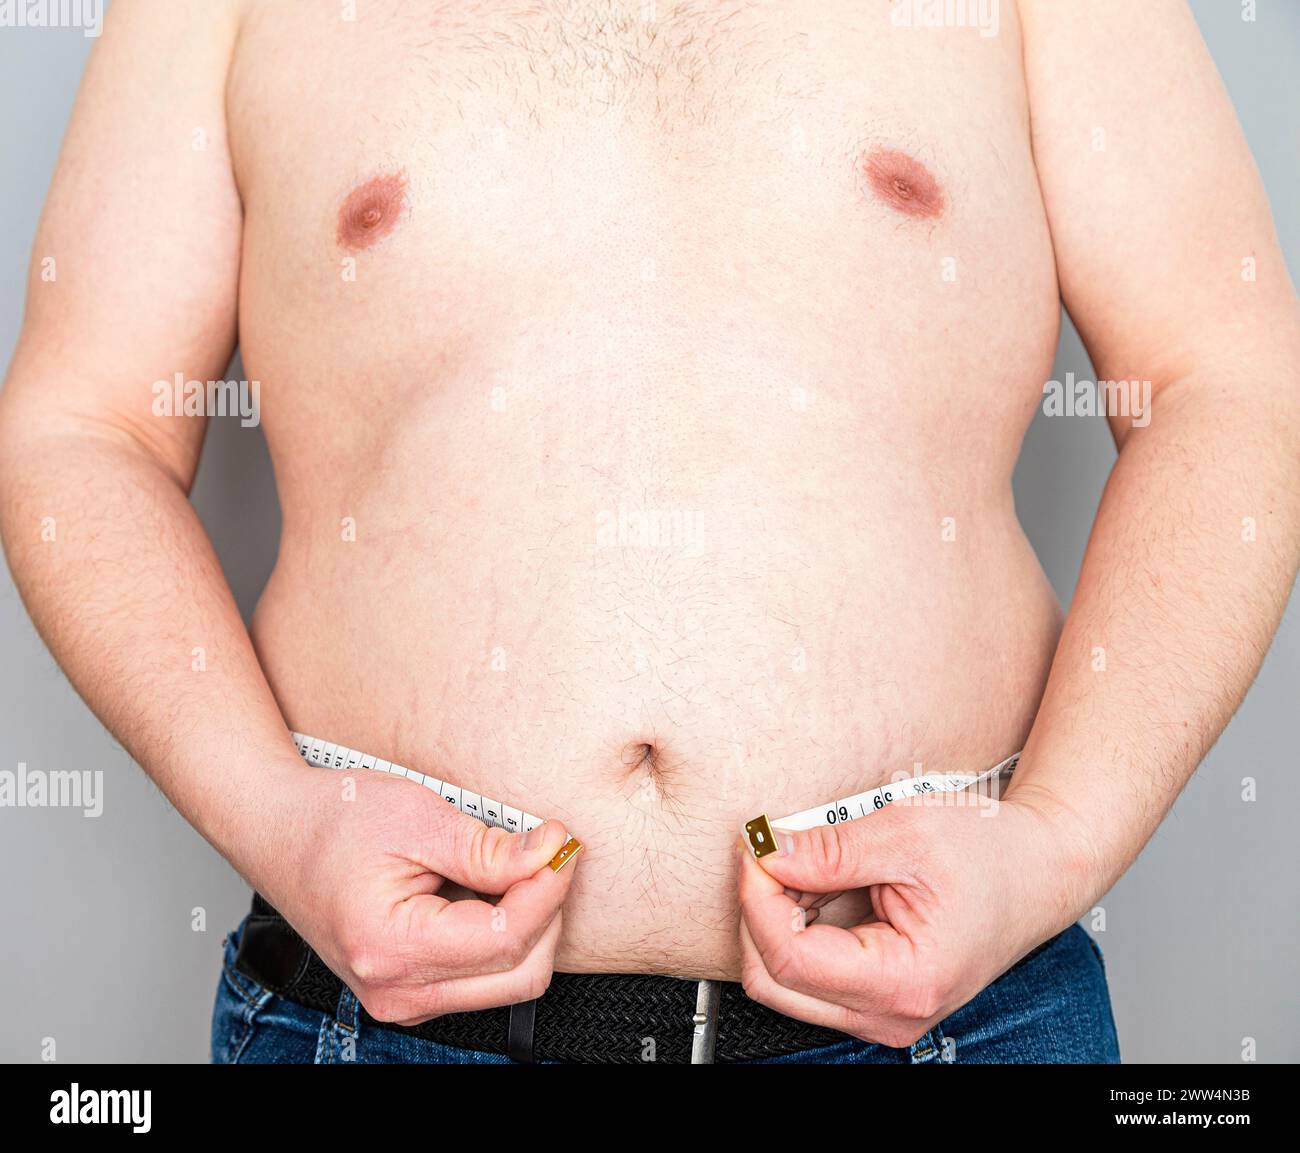 Close-up of the overweight belly of an unrecognizable Caucasian man with a tape measure that is not enough to encircle his abdomen. Stock Photo